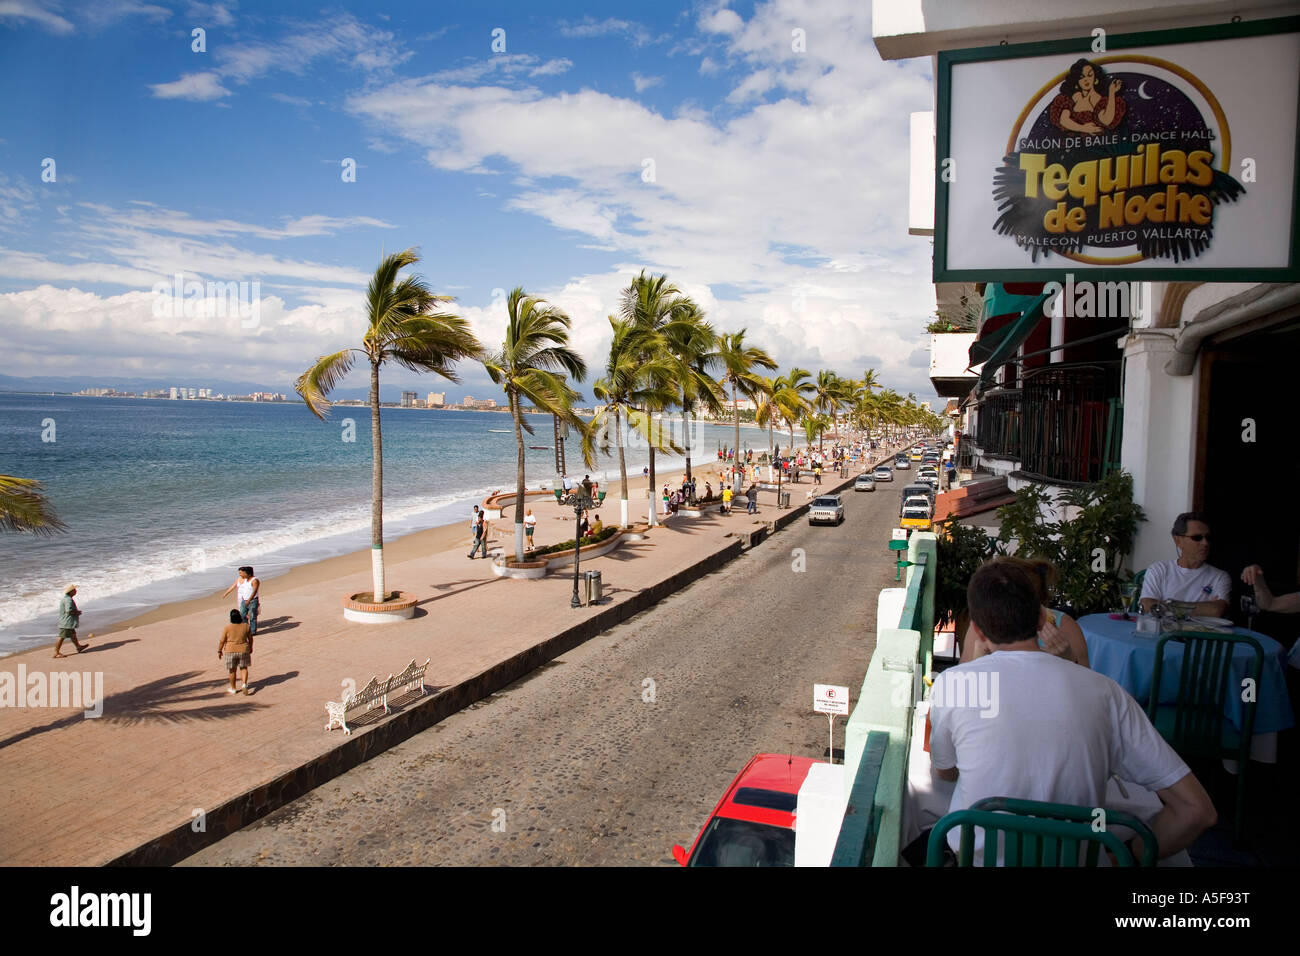 view on Malecon walk from Tequilas de Noche restaurant Stock Photo